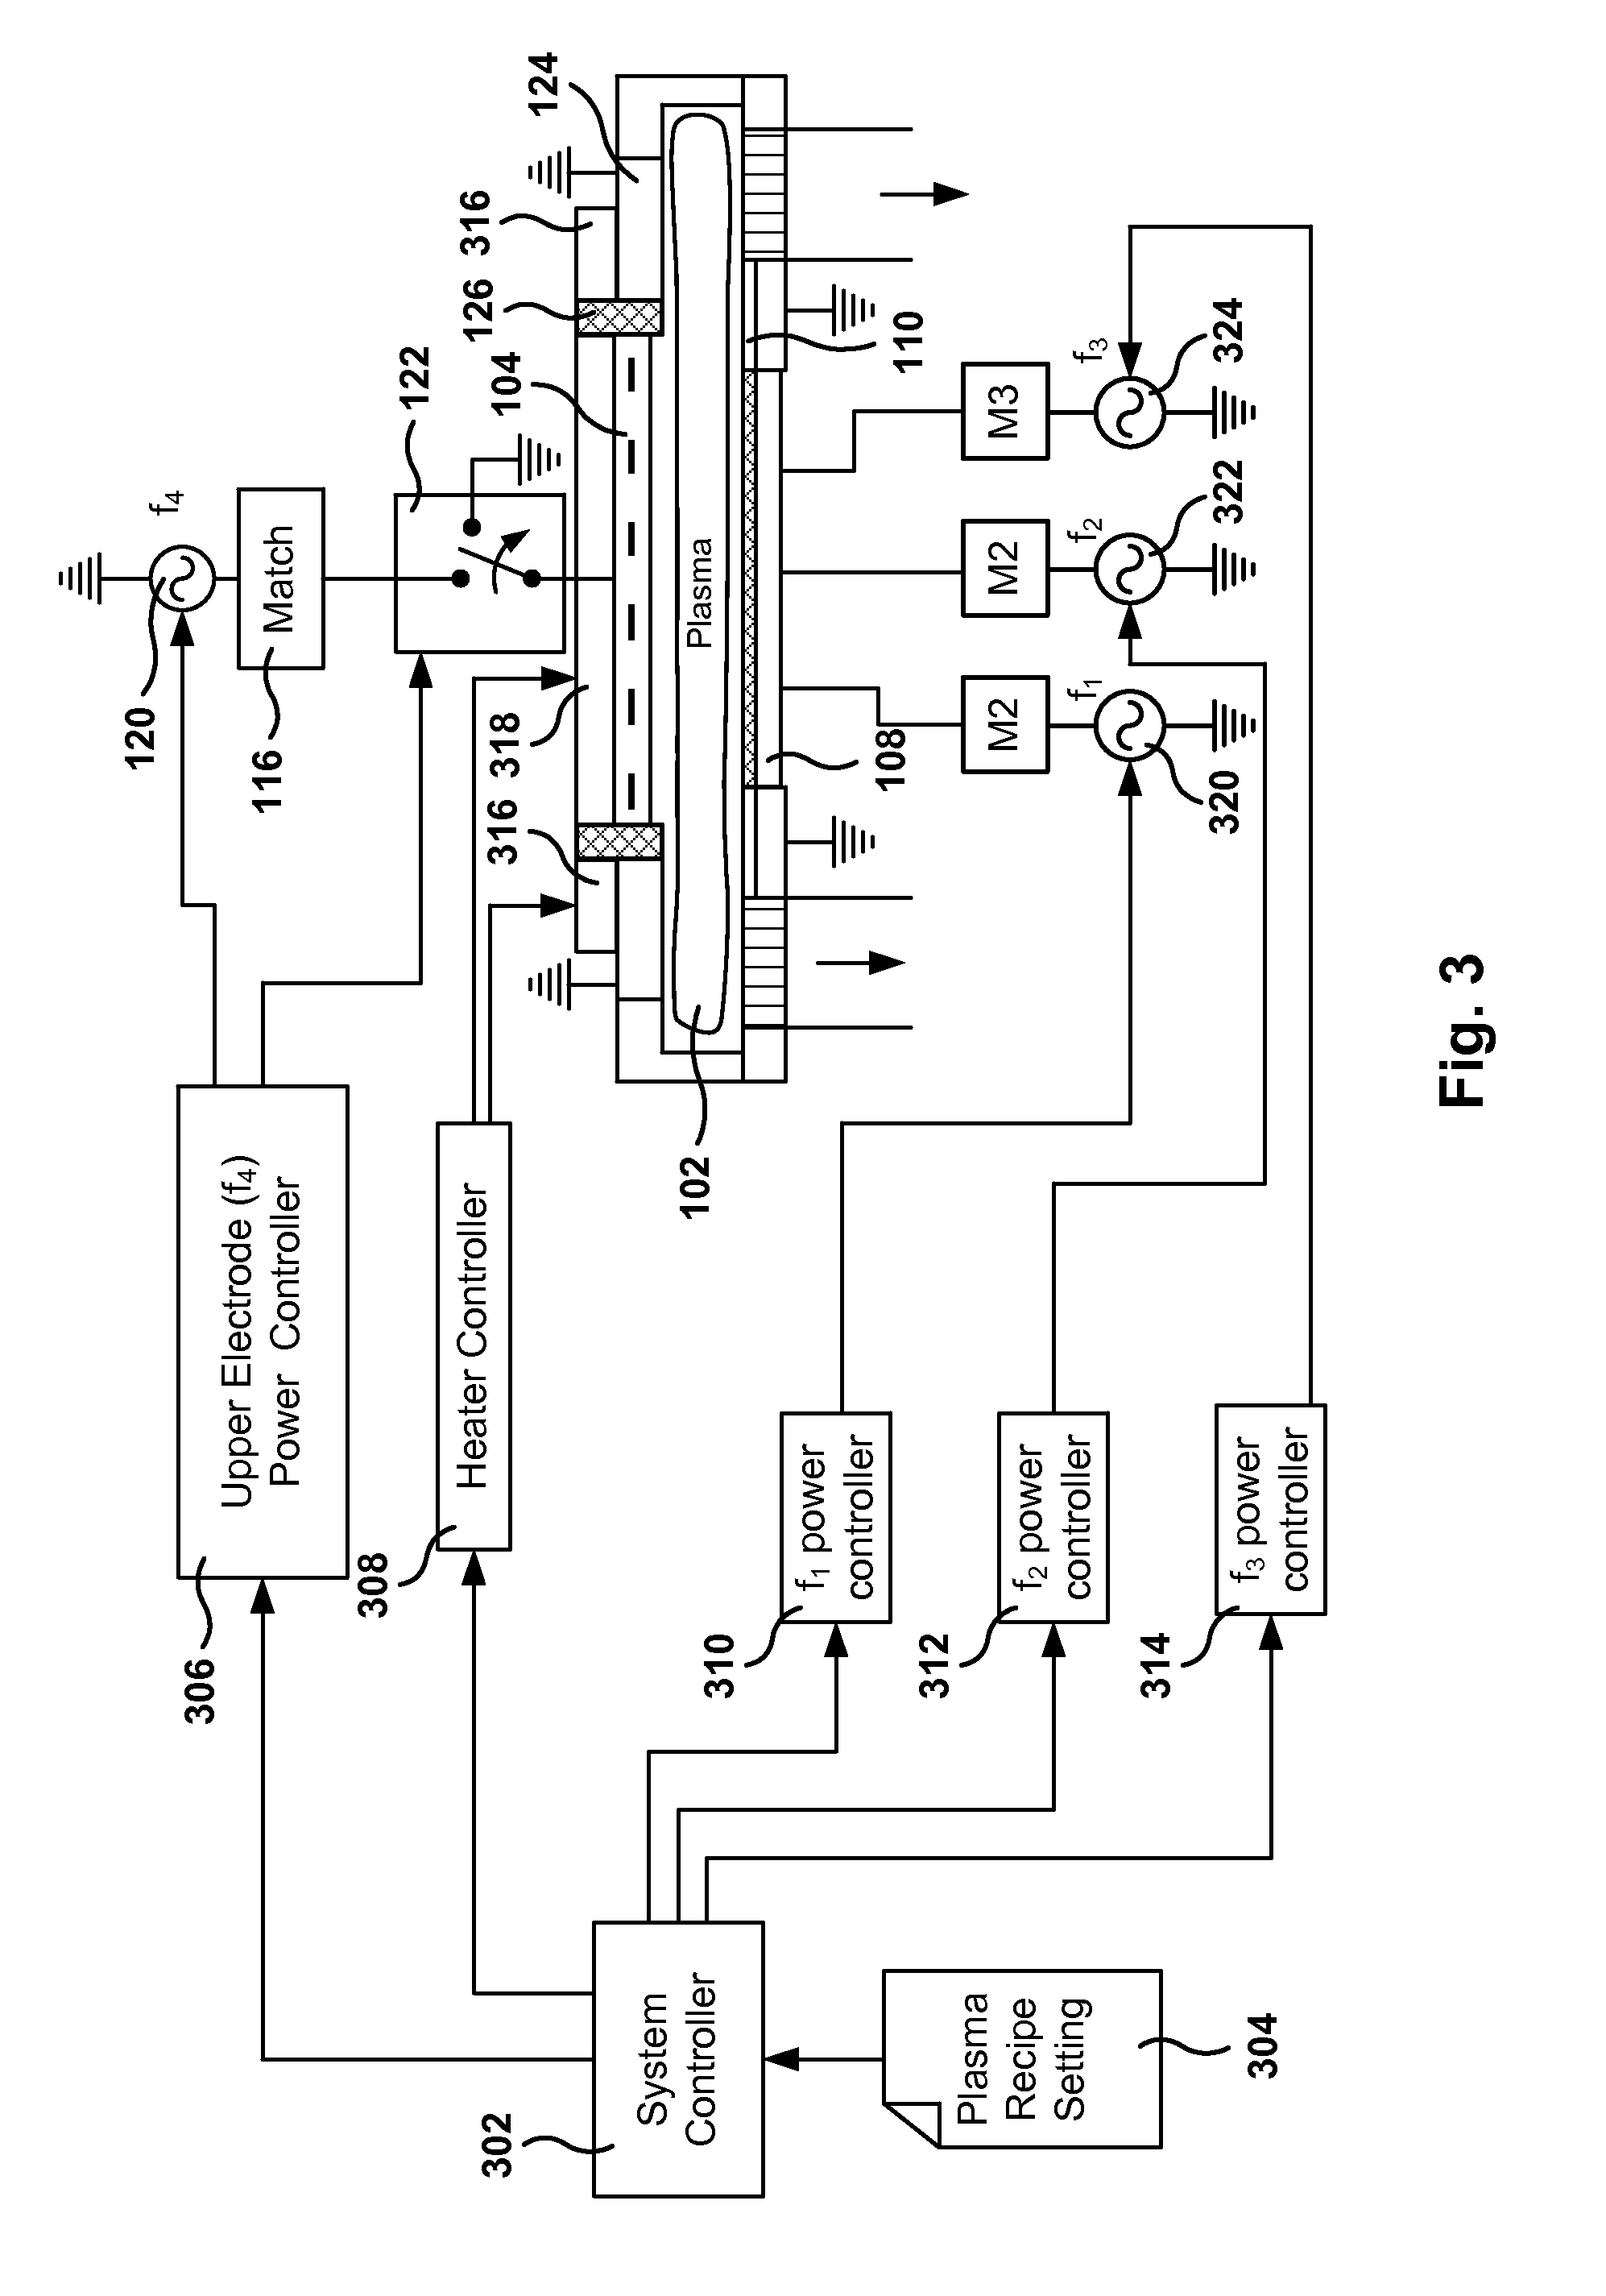 Triode reactor design with multiple radiofrequency powers